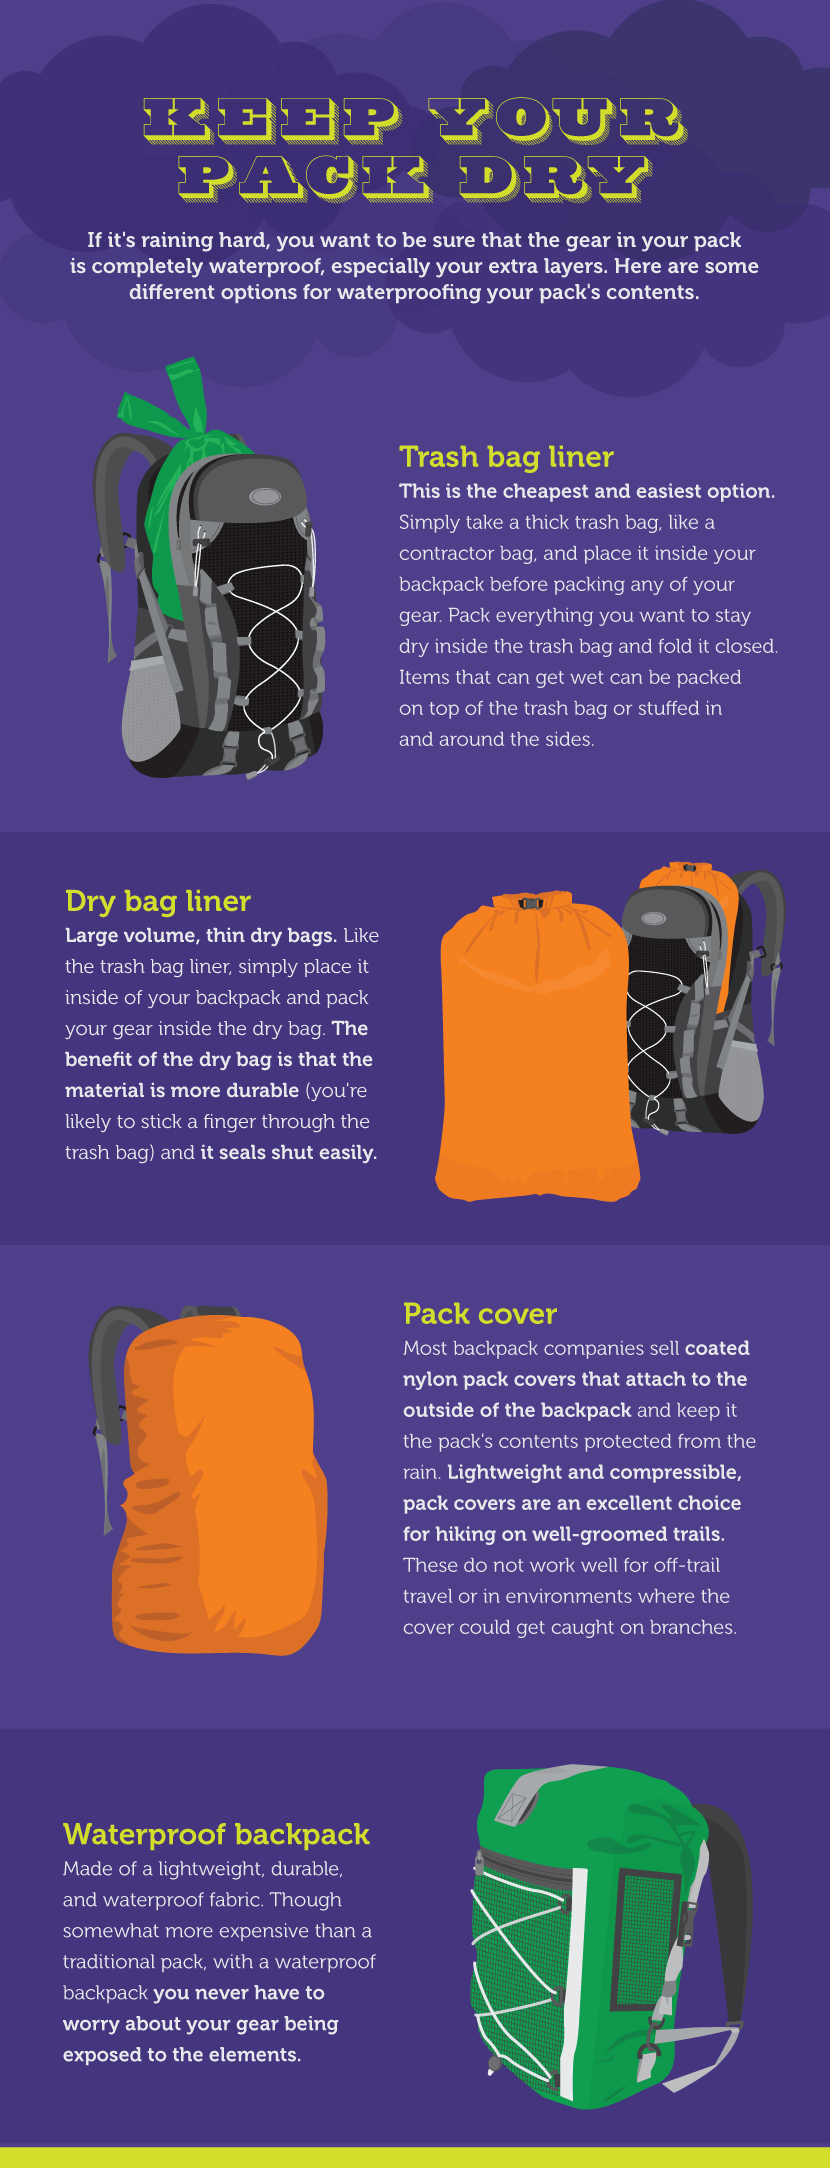 Keep Your Backpack Dry Hiking - How to Stay Comfortable Backpacking in Bad Weather